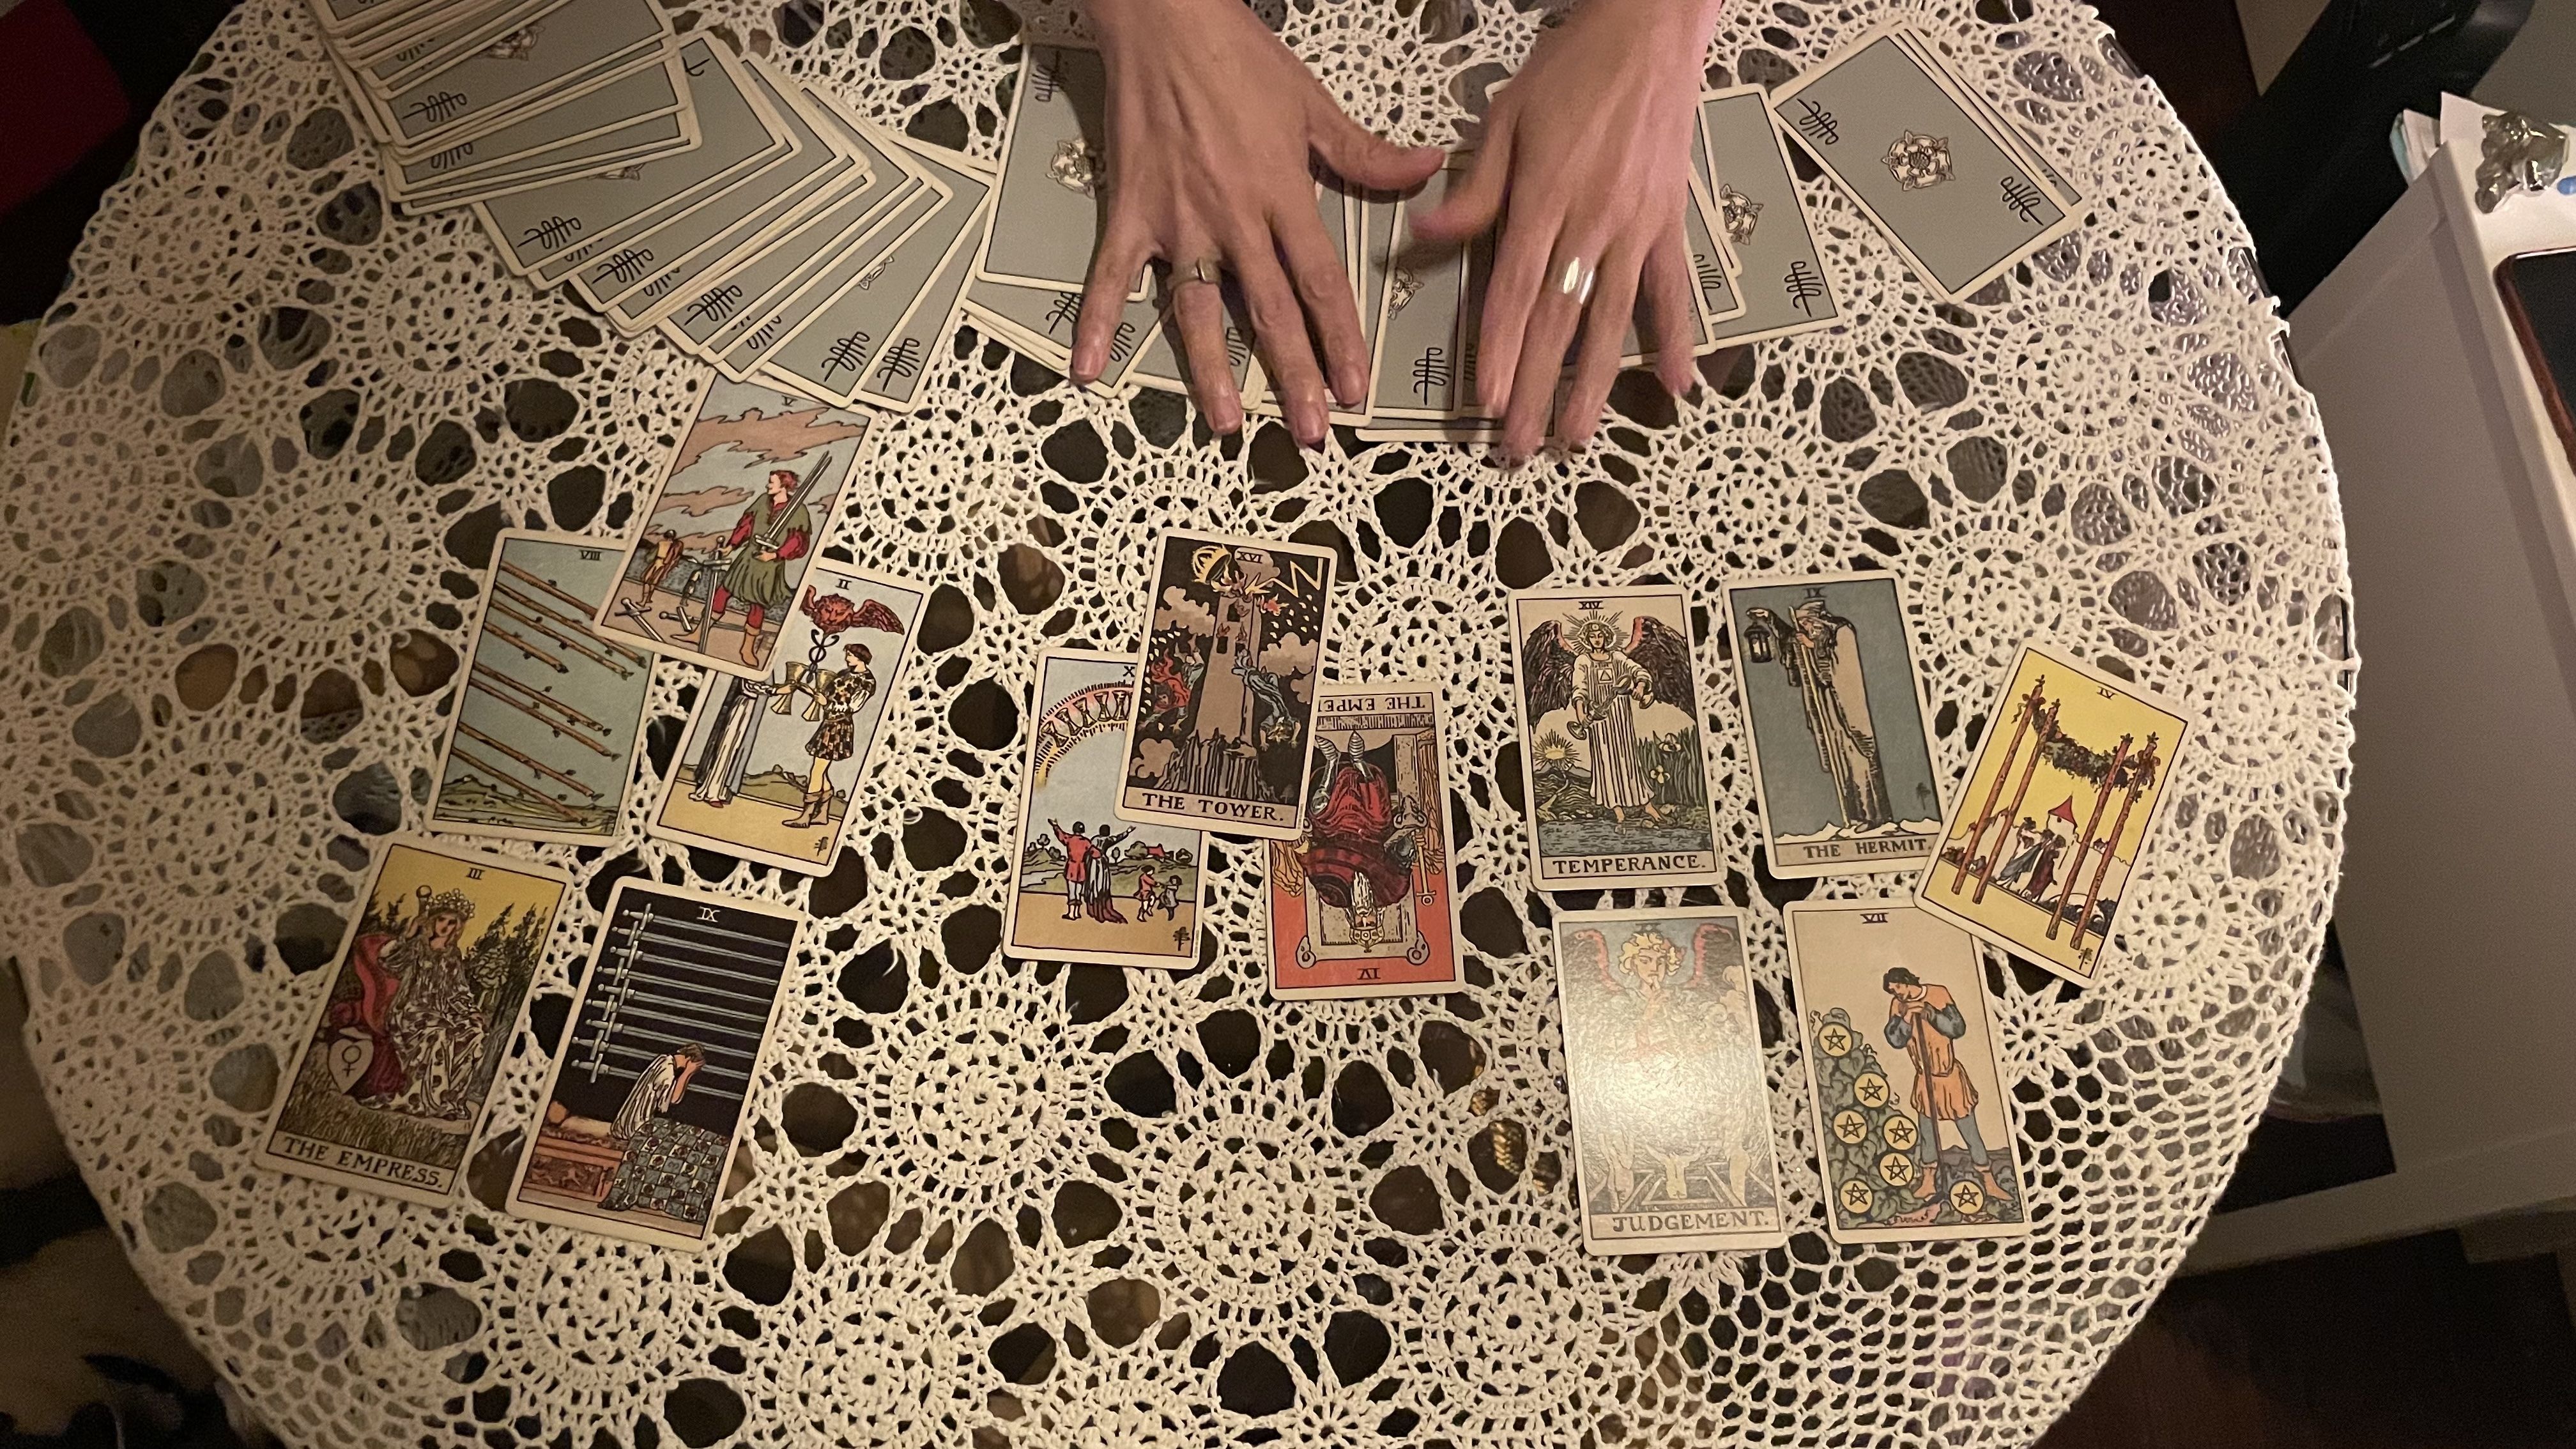 A photo of tarot cards laid out on a circular table with a pair of hands touching the cards.